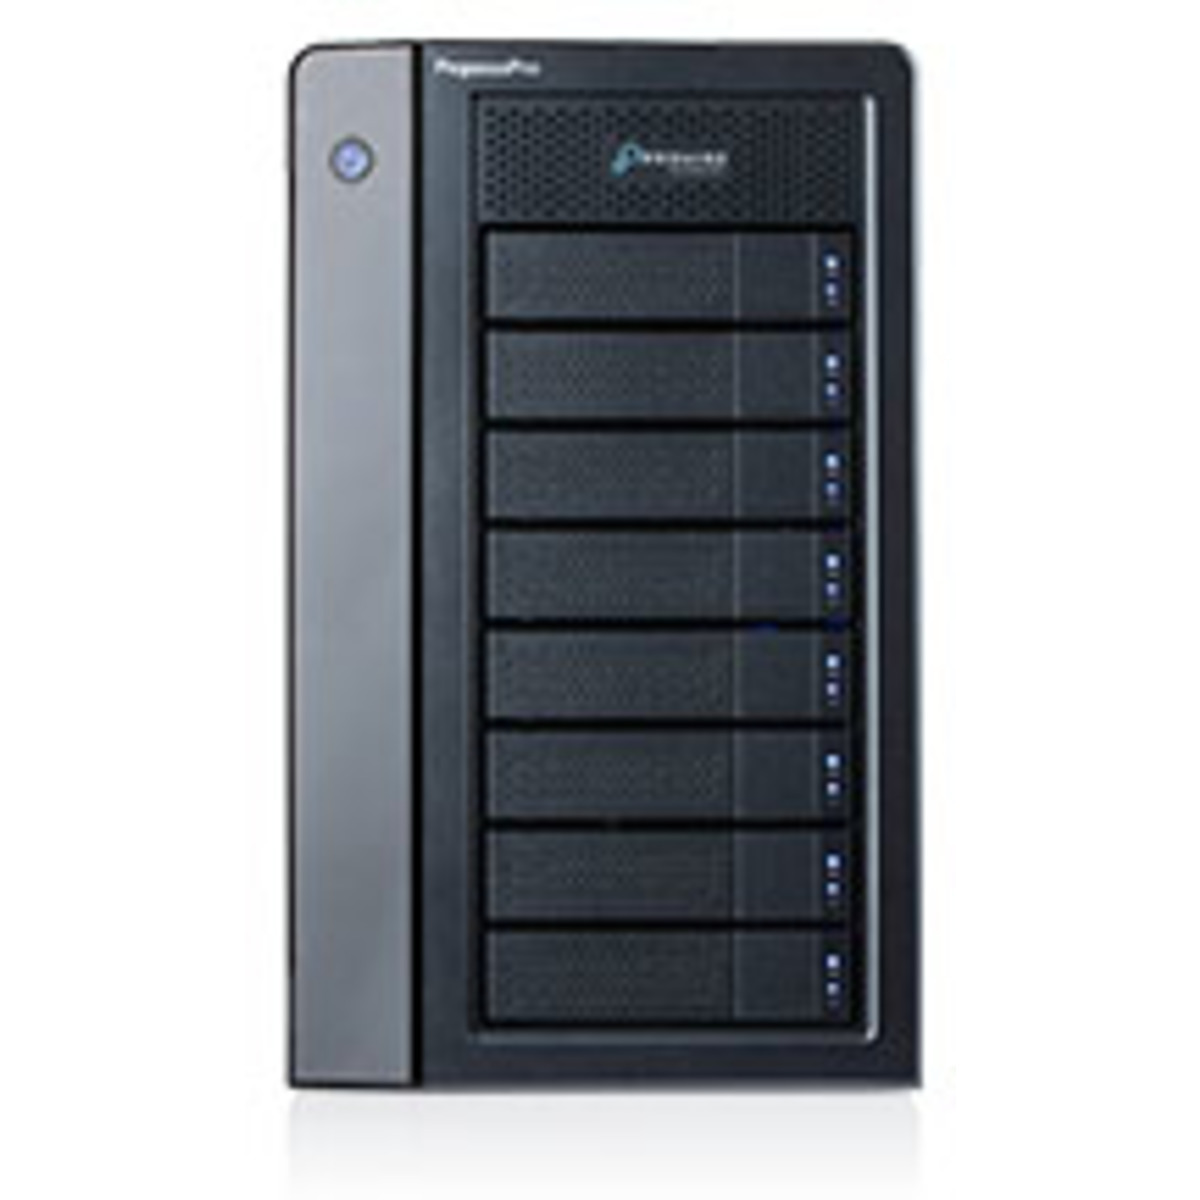 buy Promise Technology PegasusPro R8 176tb Desktop DAS-NAS - Combo Direct + Network Storage Device 8x22000gb Western Digital Ultrastar HC570 WUH722222ALE6L4 3.5 7200rpm SATA 6Gb/s HDD ENTERPRISE Class Drives Installed - Burn-In Tested - nas headquarters buy network attached storage server device das new raid-5 free shipping simply usa PegasusPro R8